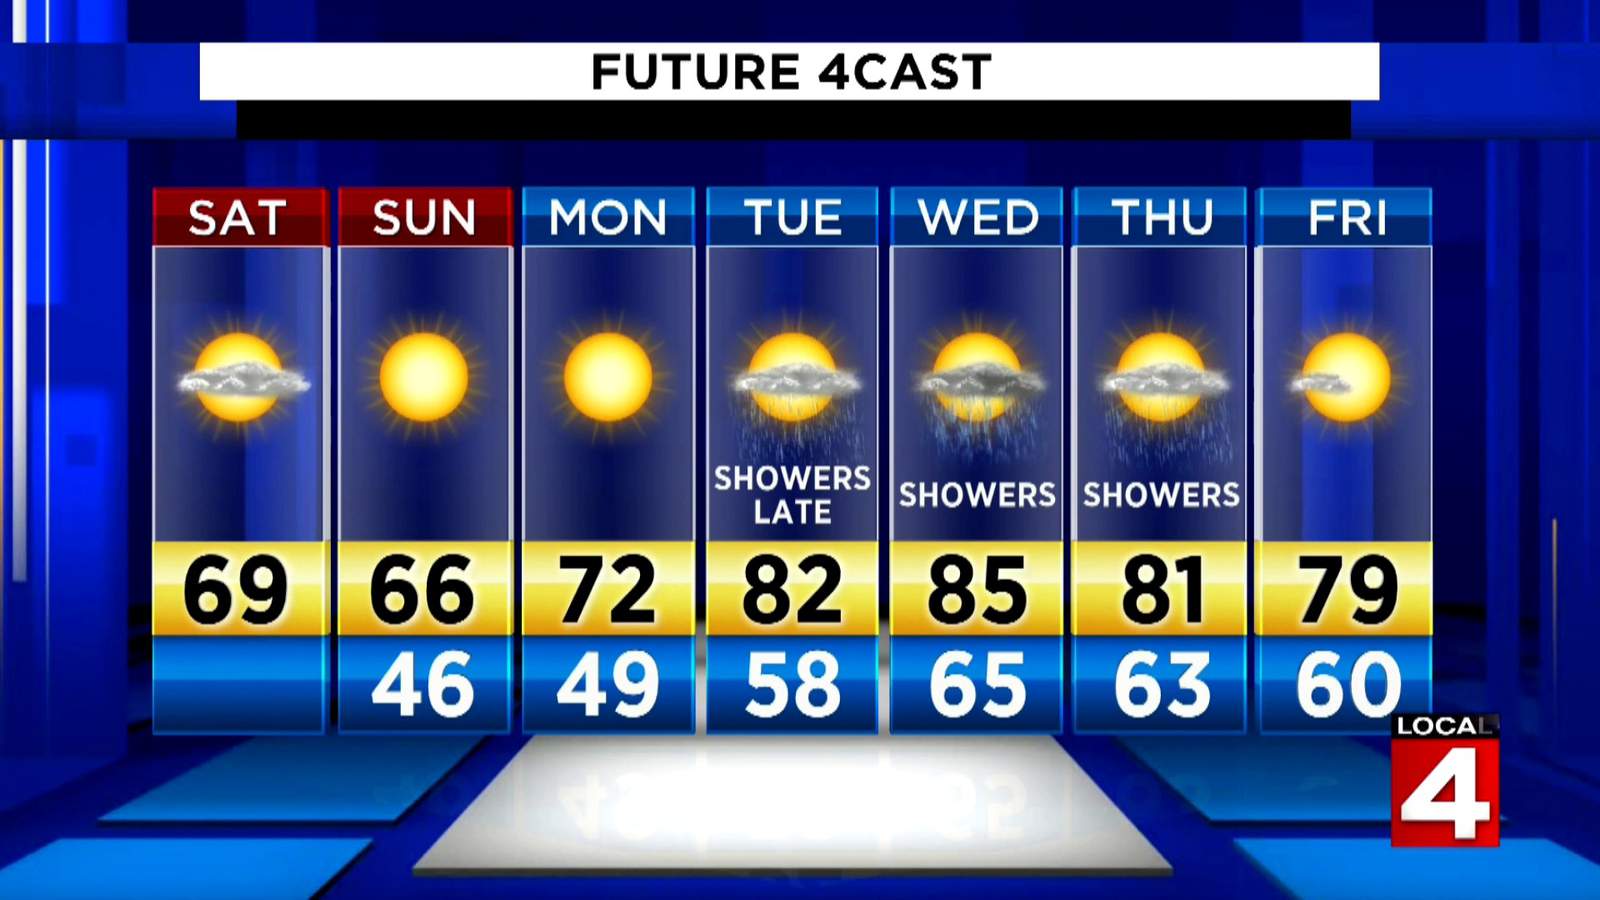 Metro Detroit weather: Mild with scattered wet weather Saturday afternoon